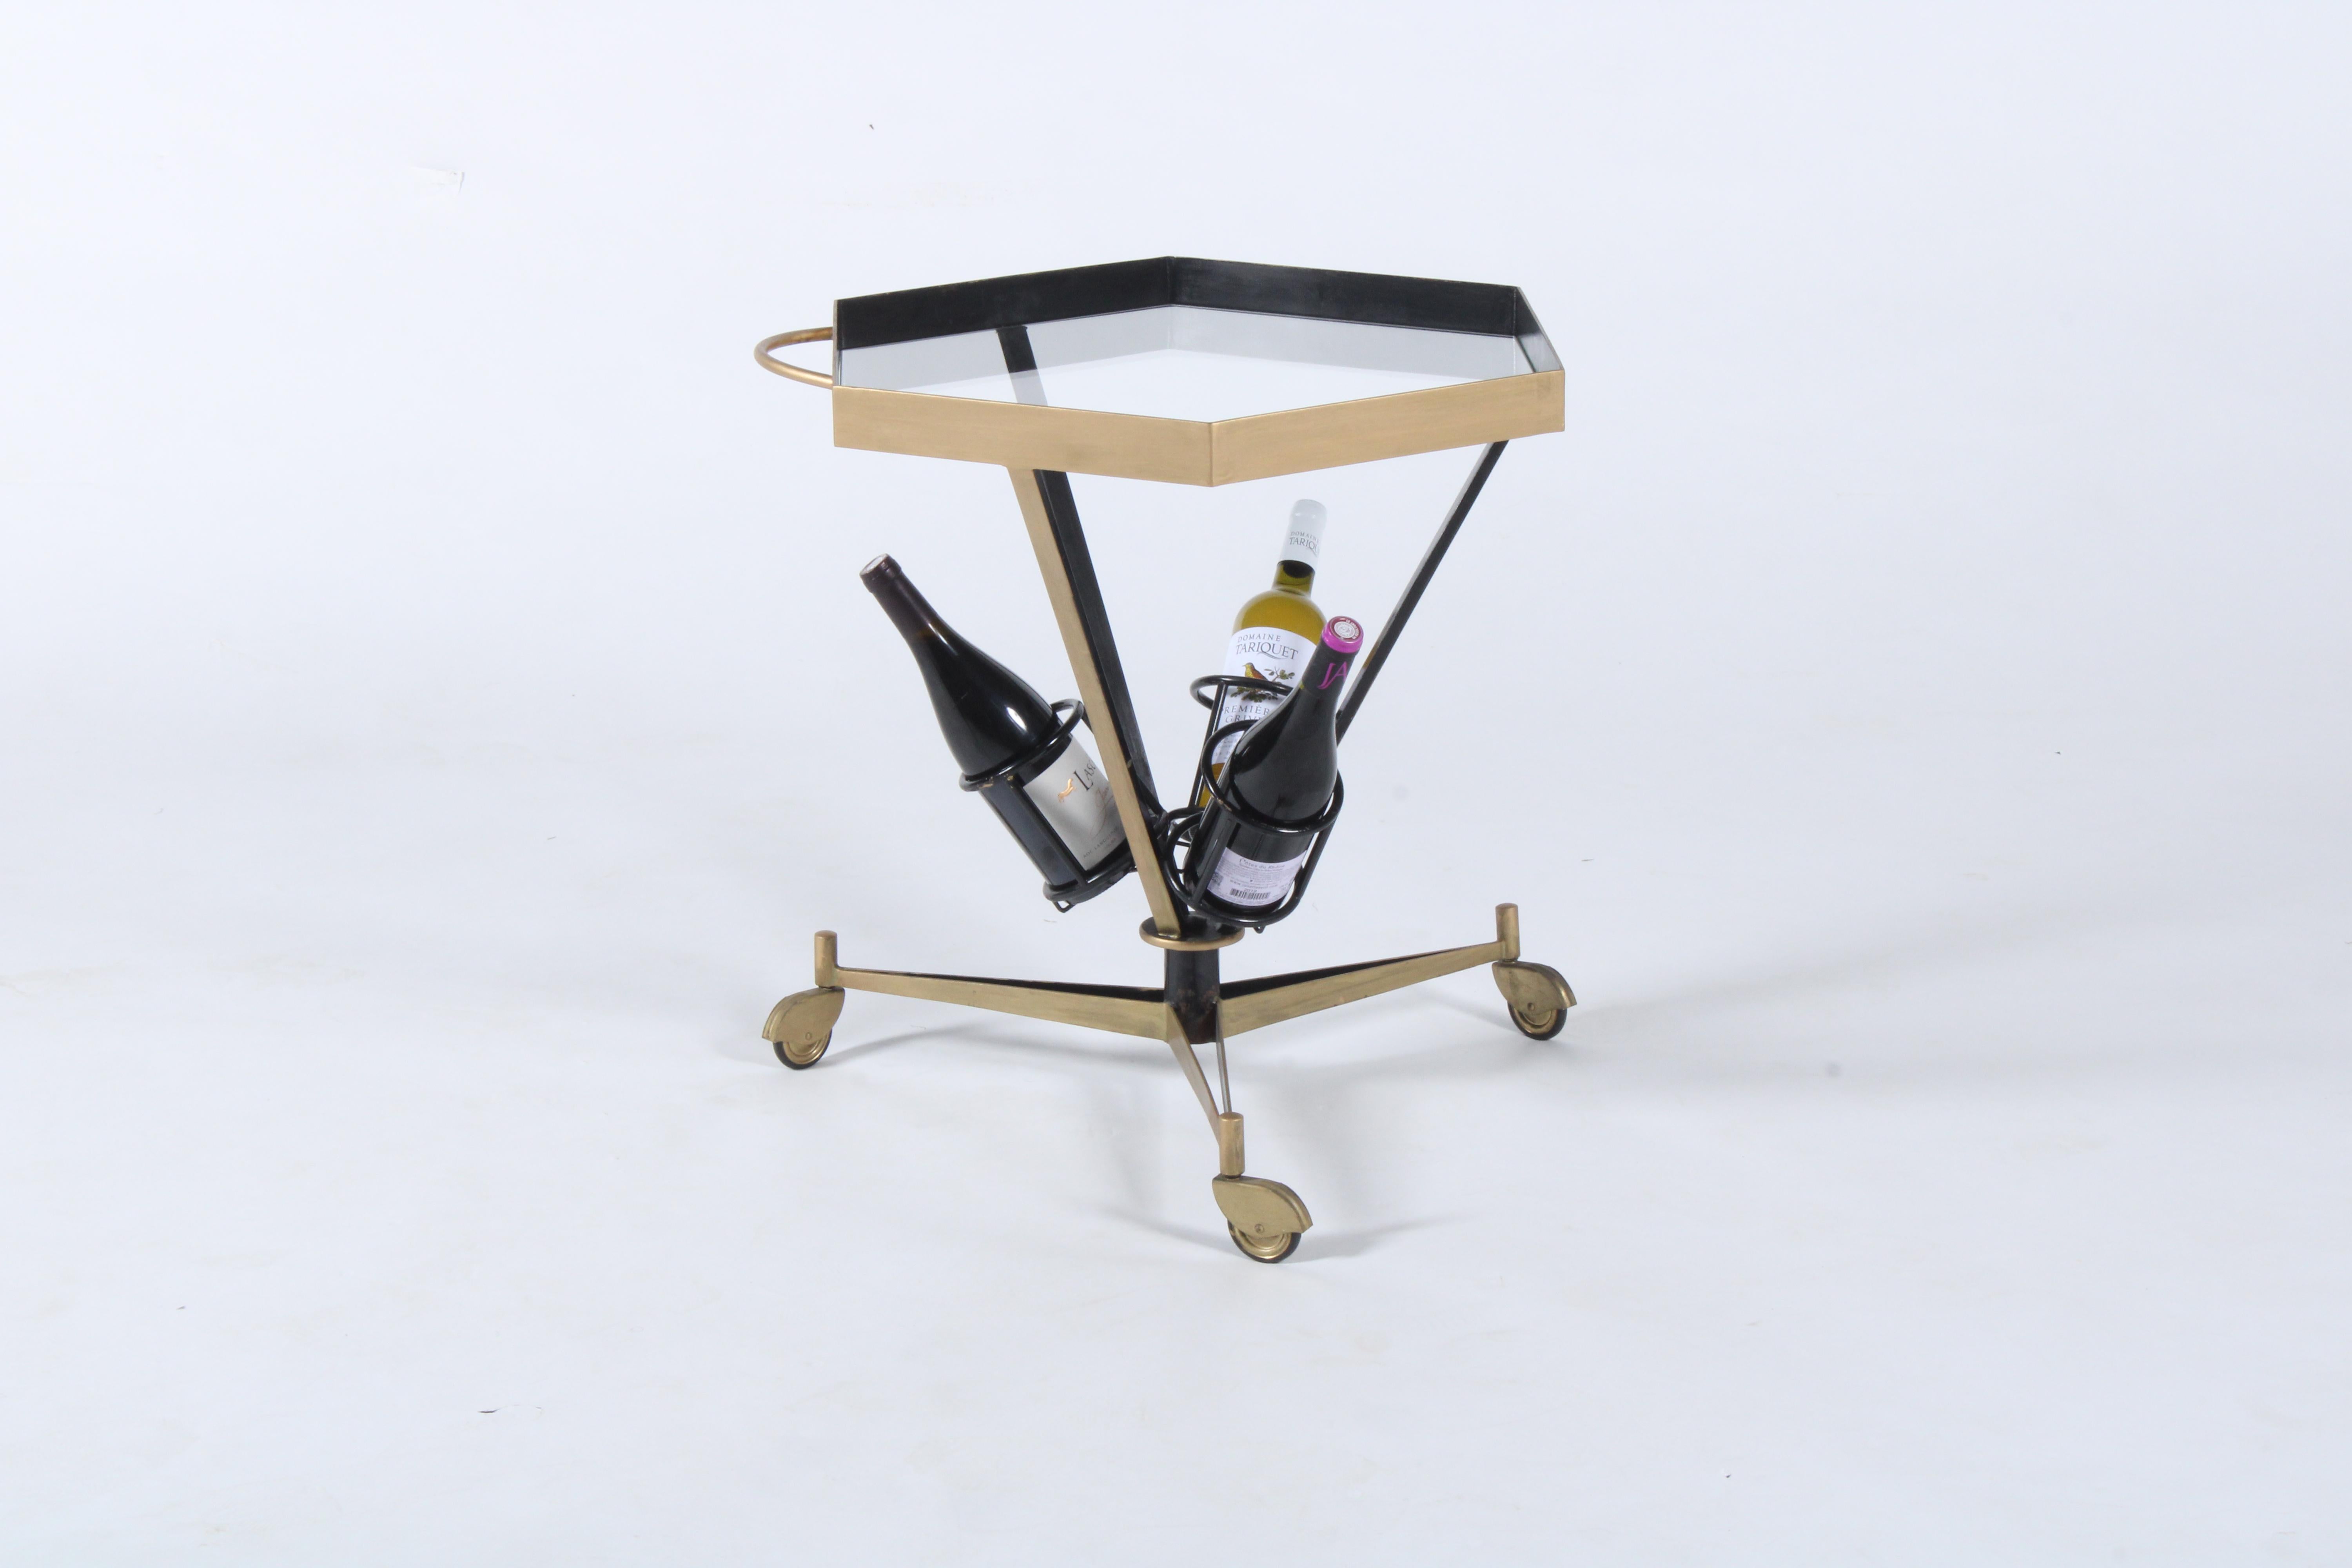 A classic mid century Italian drinks trolley in metal with a tripod base and hexagonal top. This stylish piece has been professionally restored and as such is presented in superb vintage fashion. With three bottle holders to the central column it